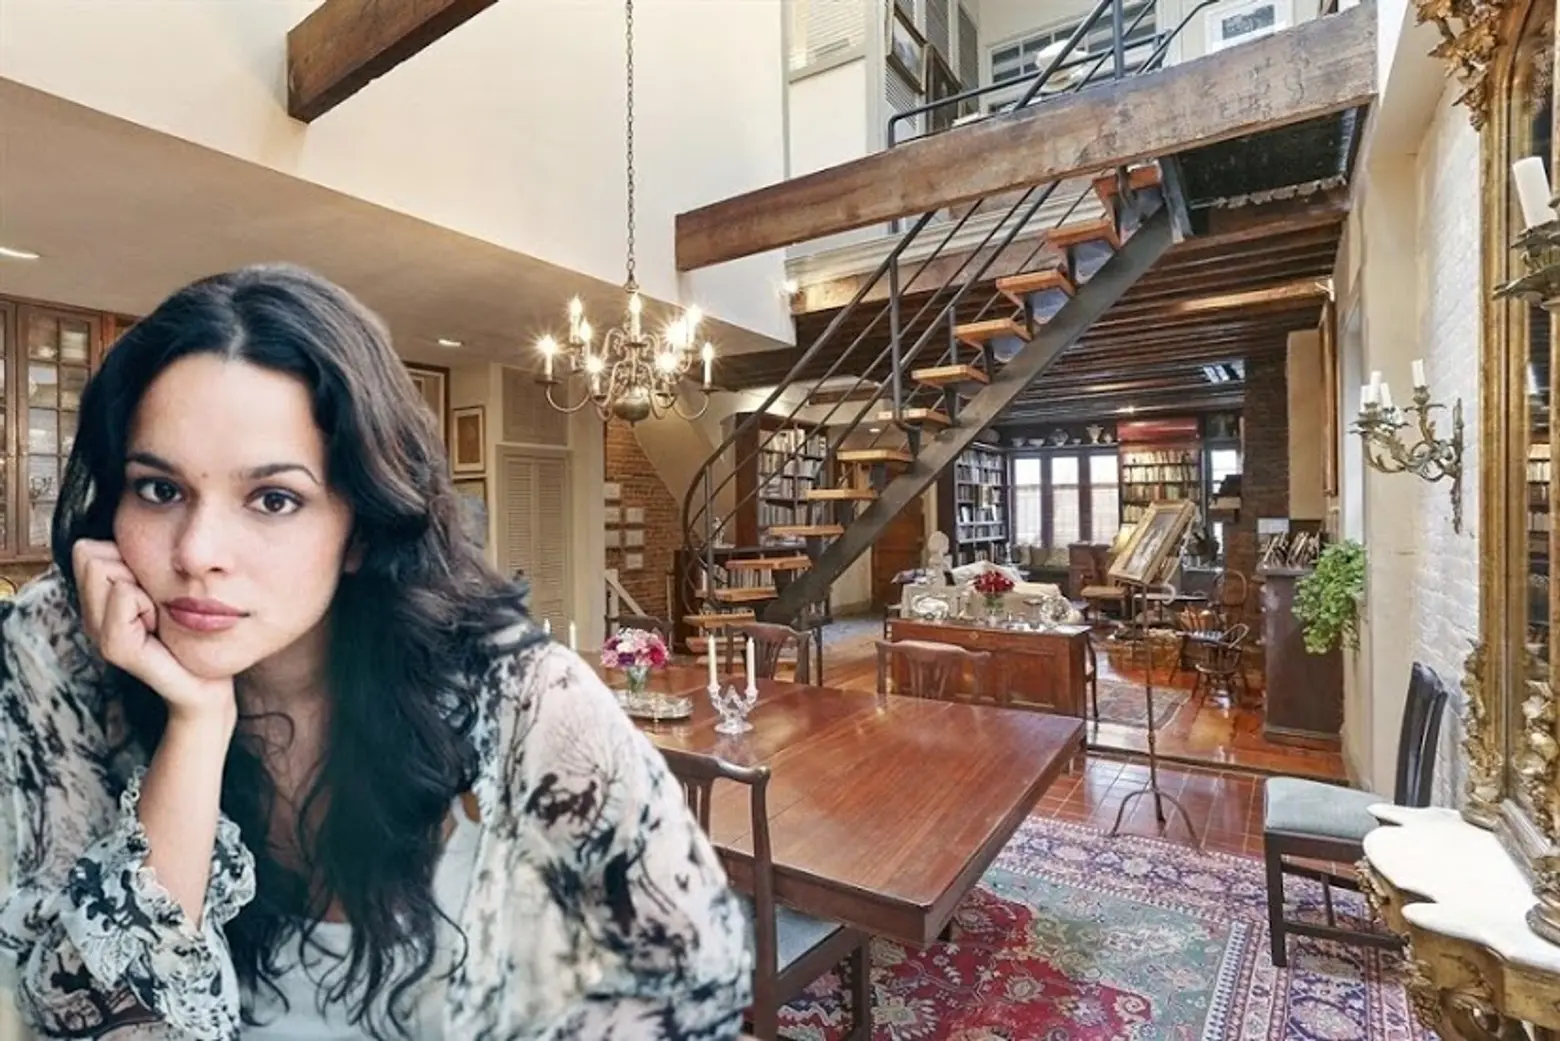 Norah Jones Gets Approval to Renovate ‘Eat, Pray, Love’ Carriage House